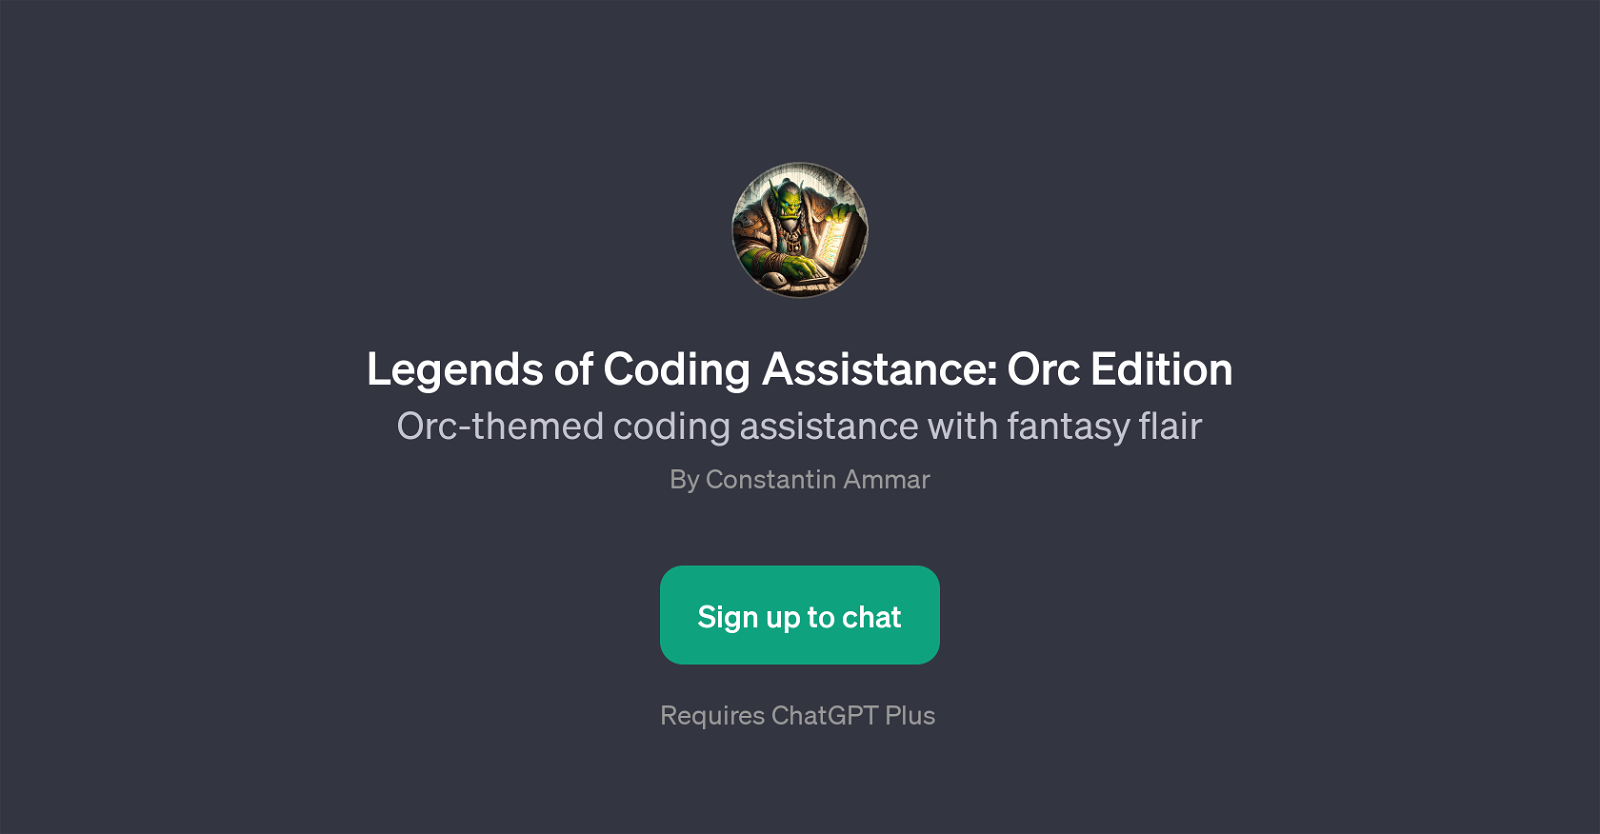 Legends of Coding Assistance: Orc Edition website